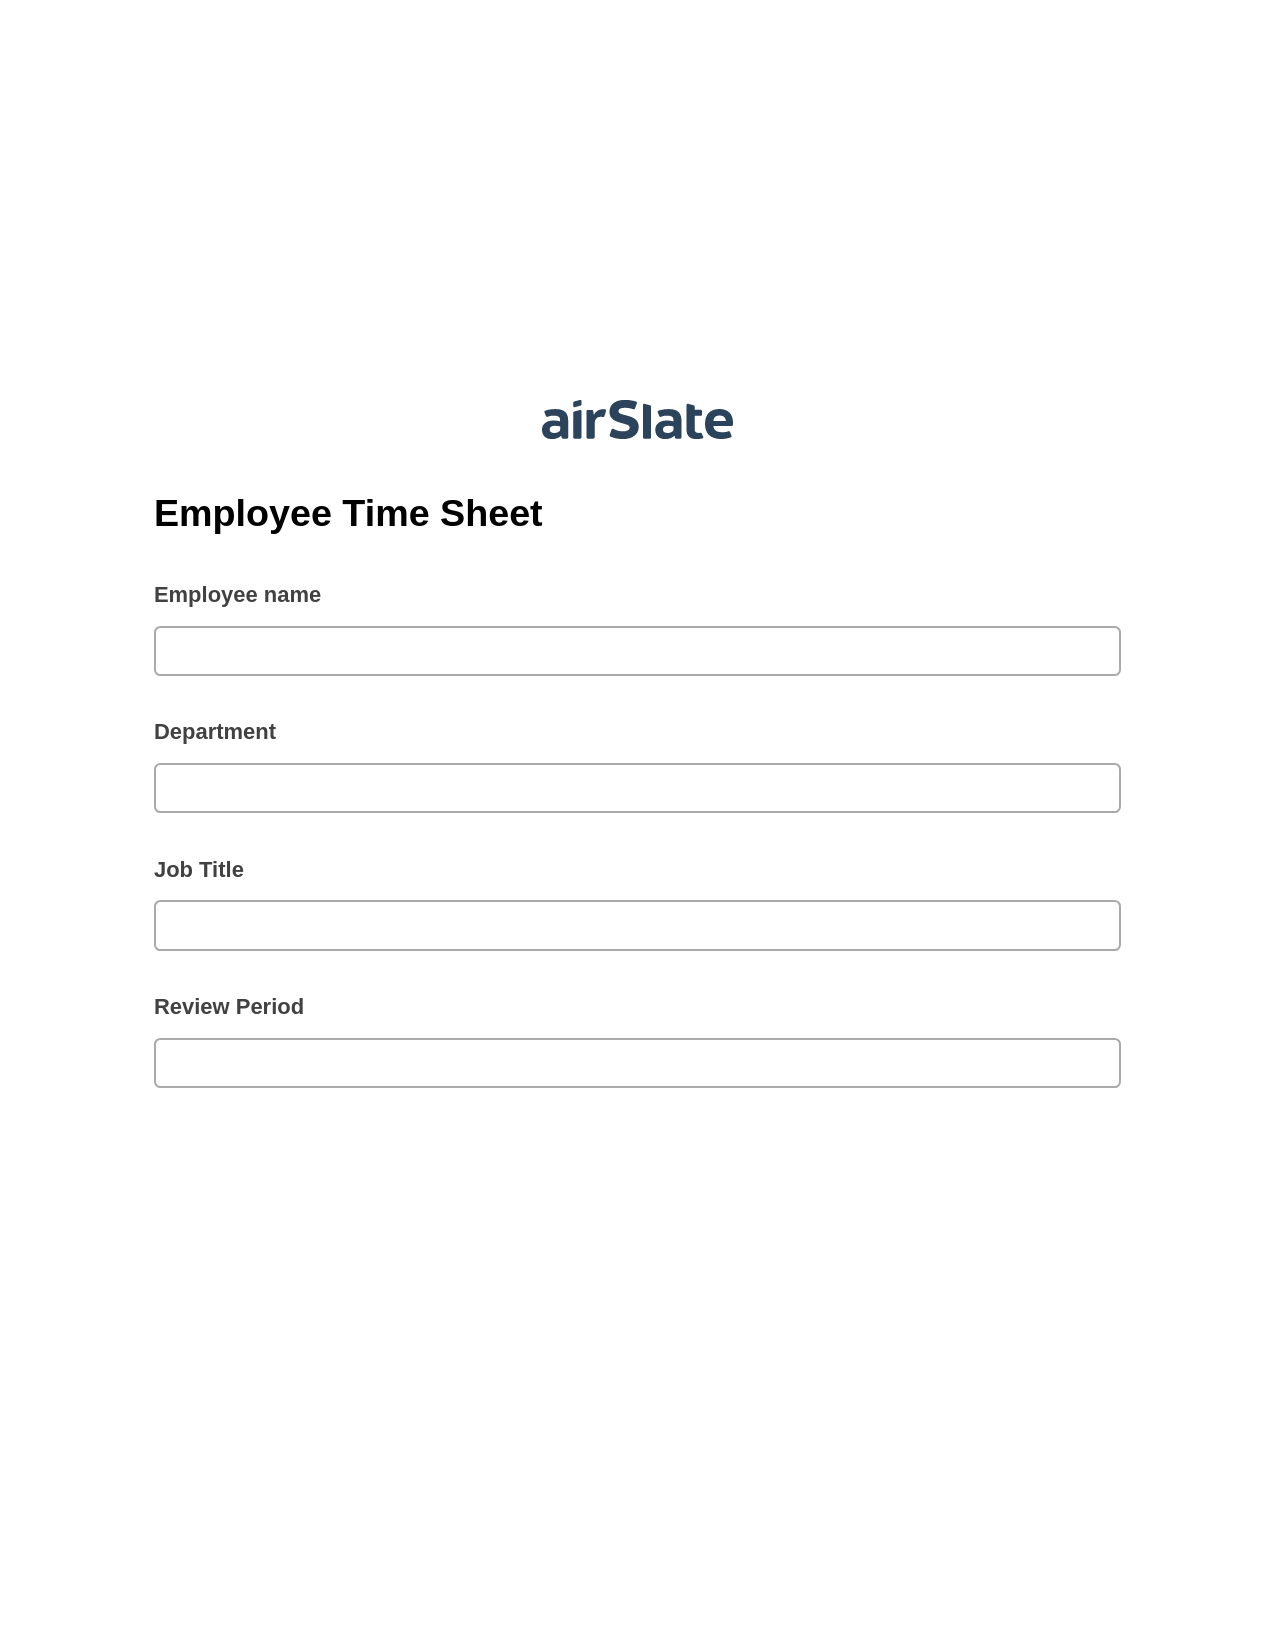 Employee Time Sheet Pre-fill from CSV File Bot, Update Audit Trail Bot, Archive to OneDrive Bot